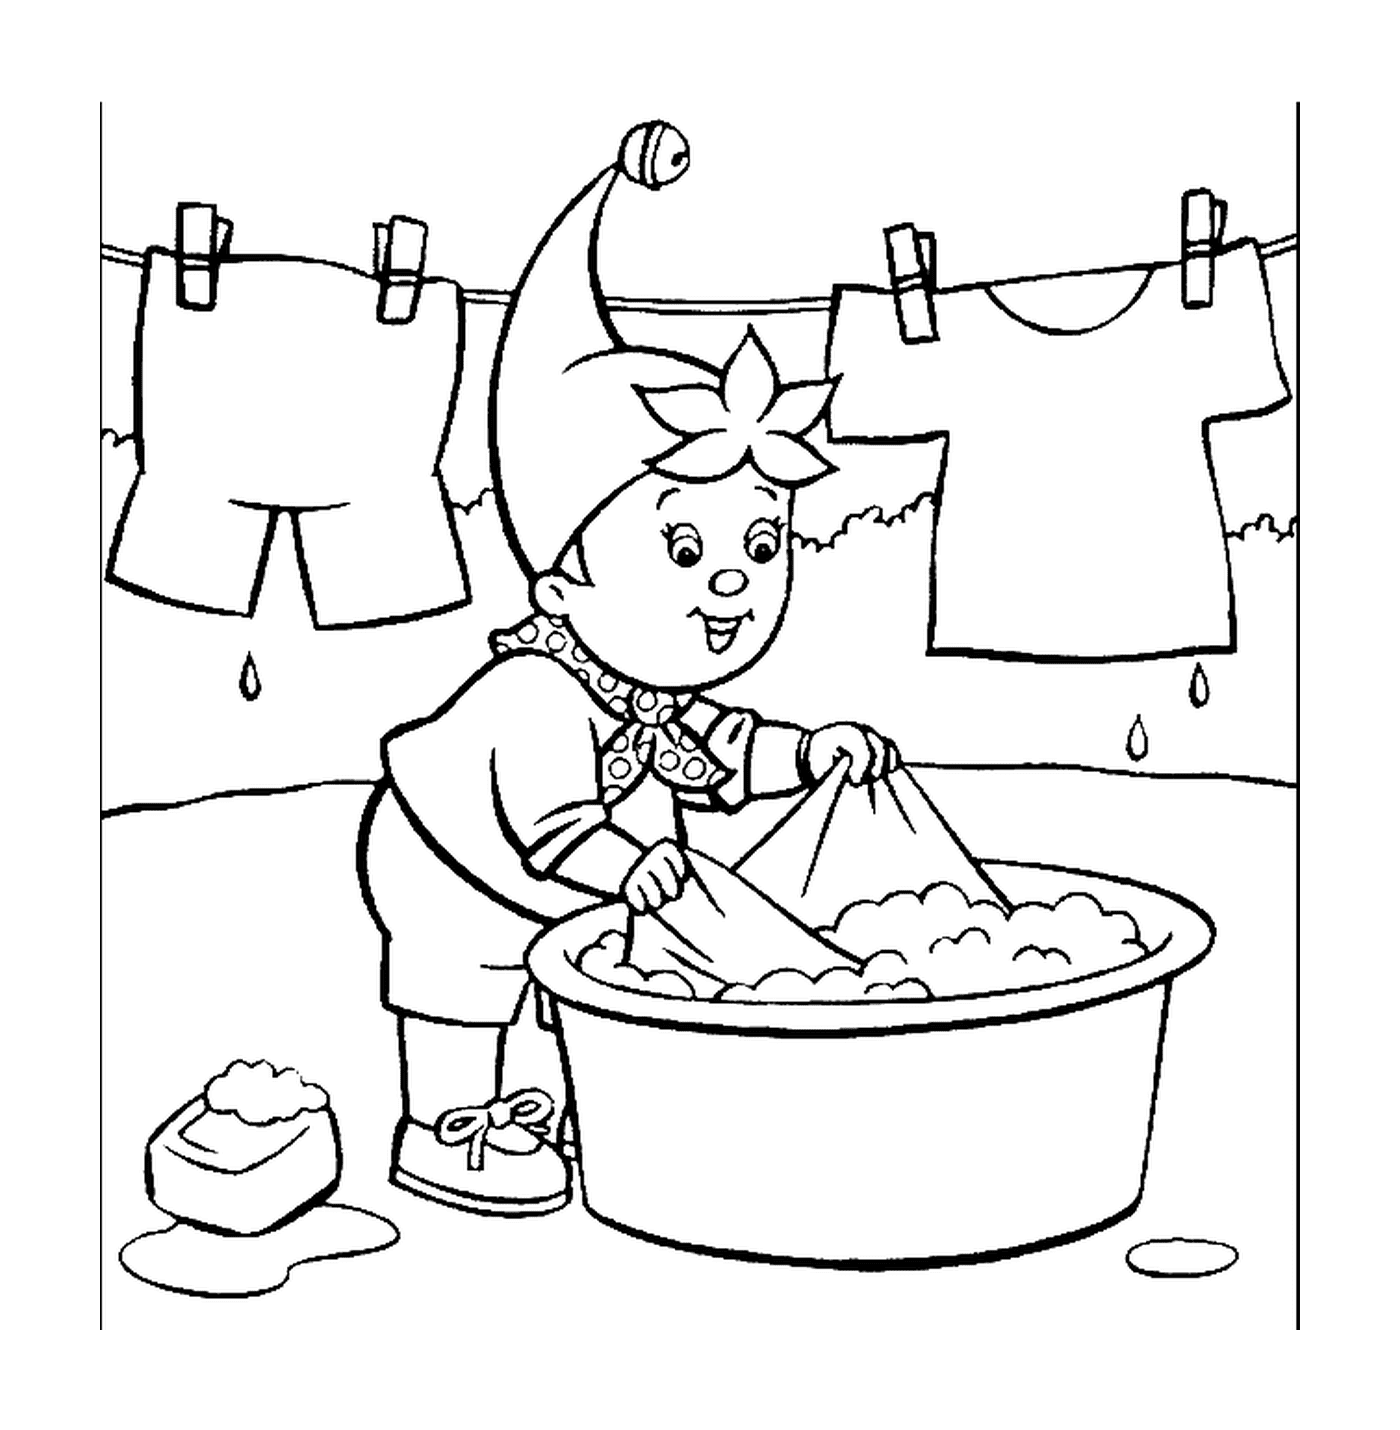  Yes Yes Washing her laundry, working gnome 